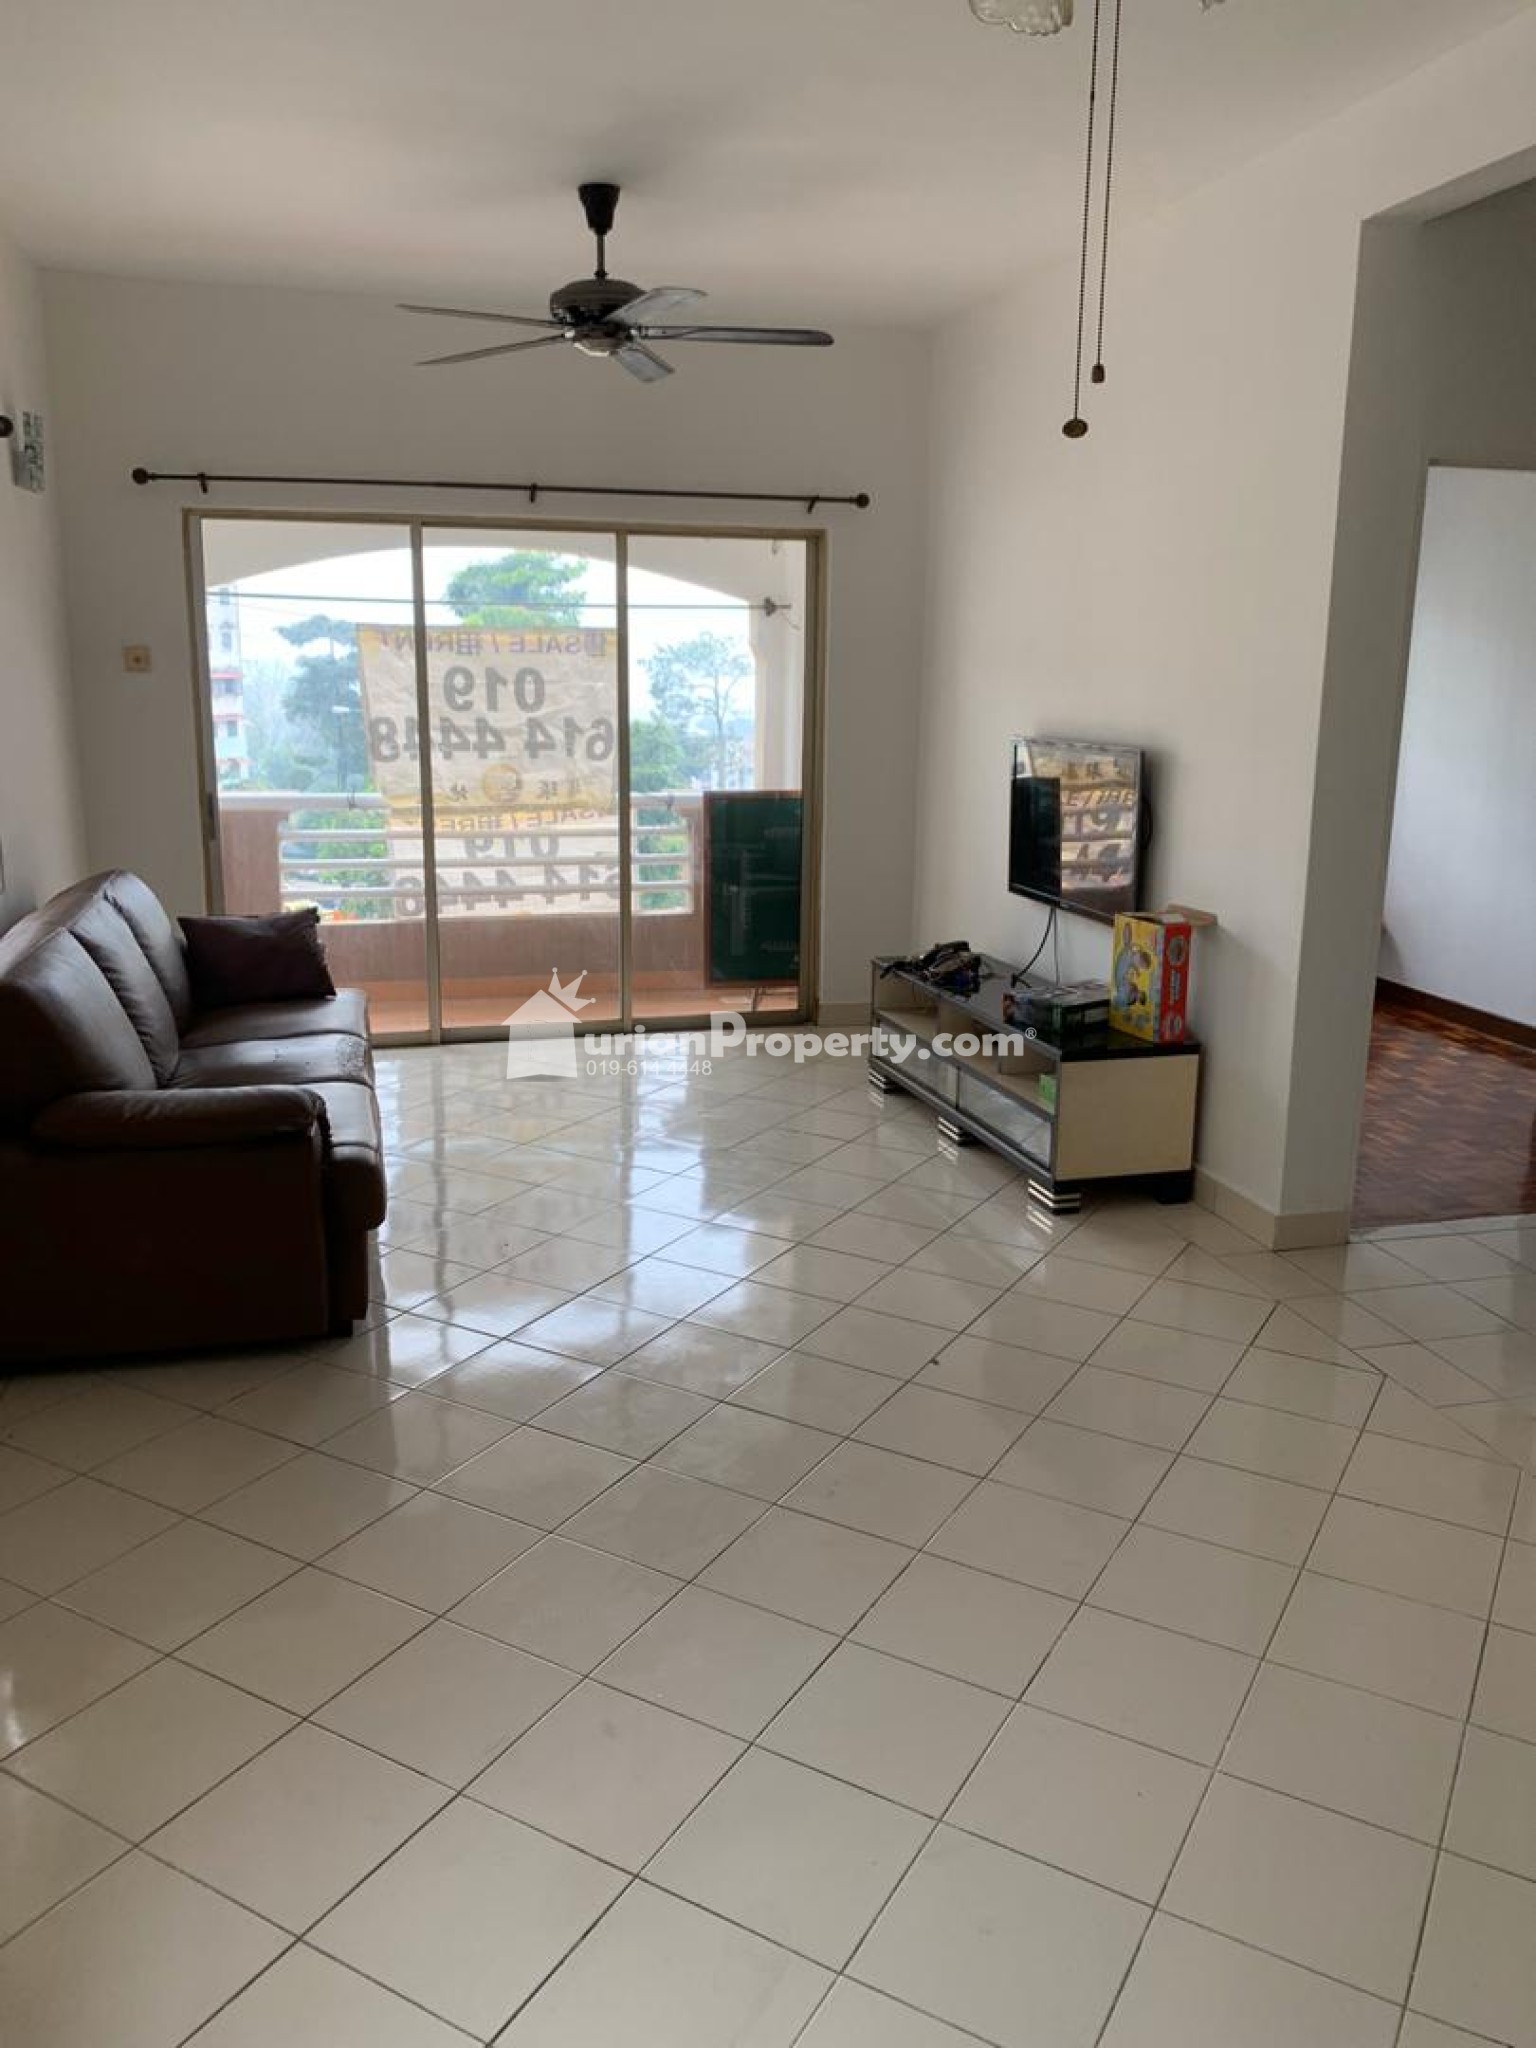 Apartment For Sale at Cengal Apartment